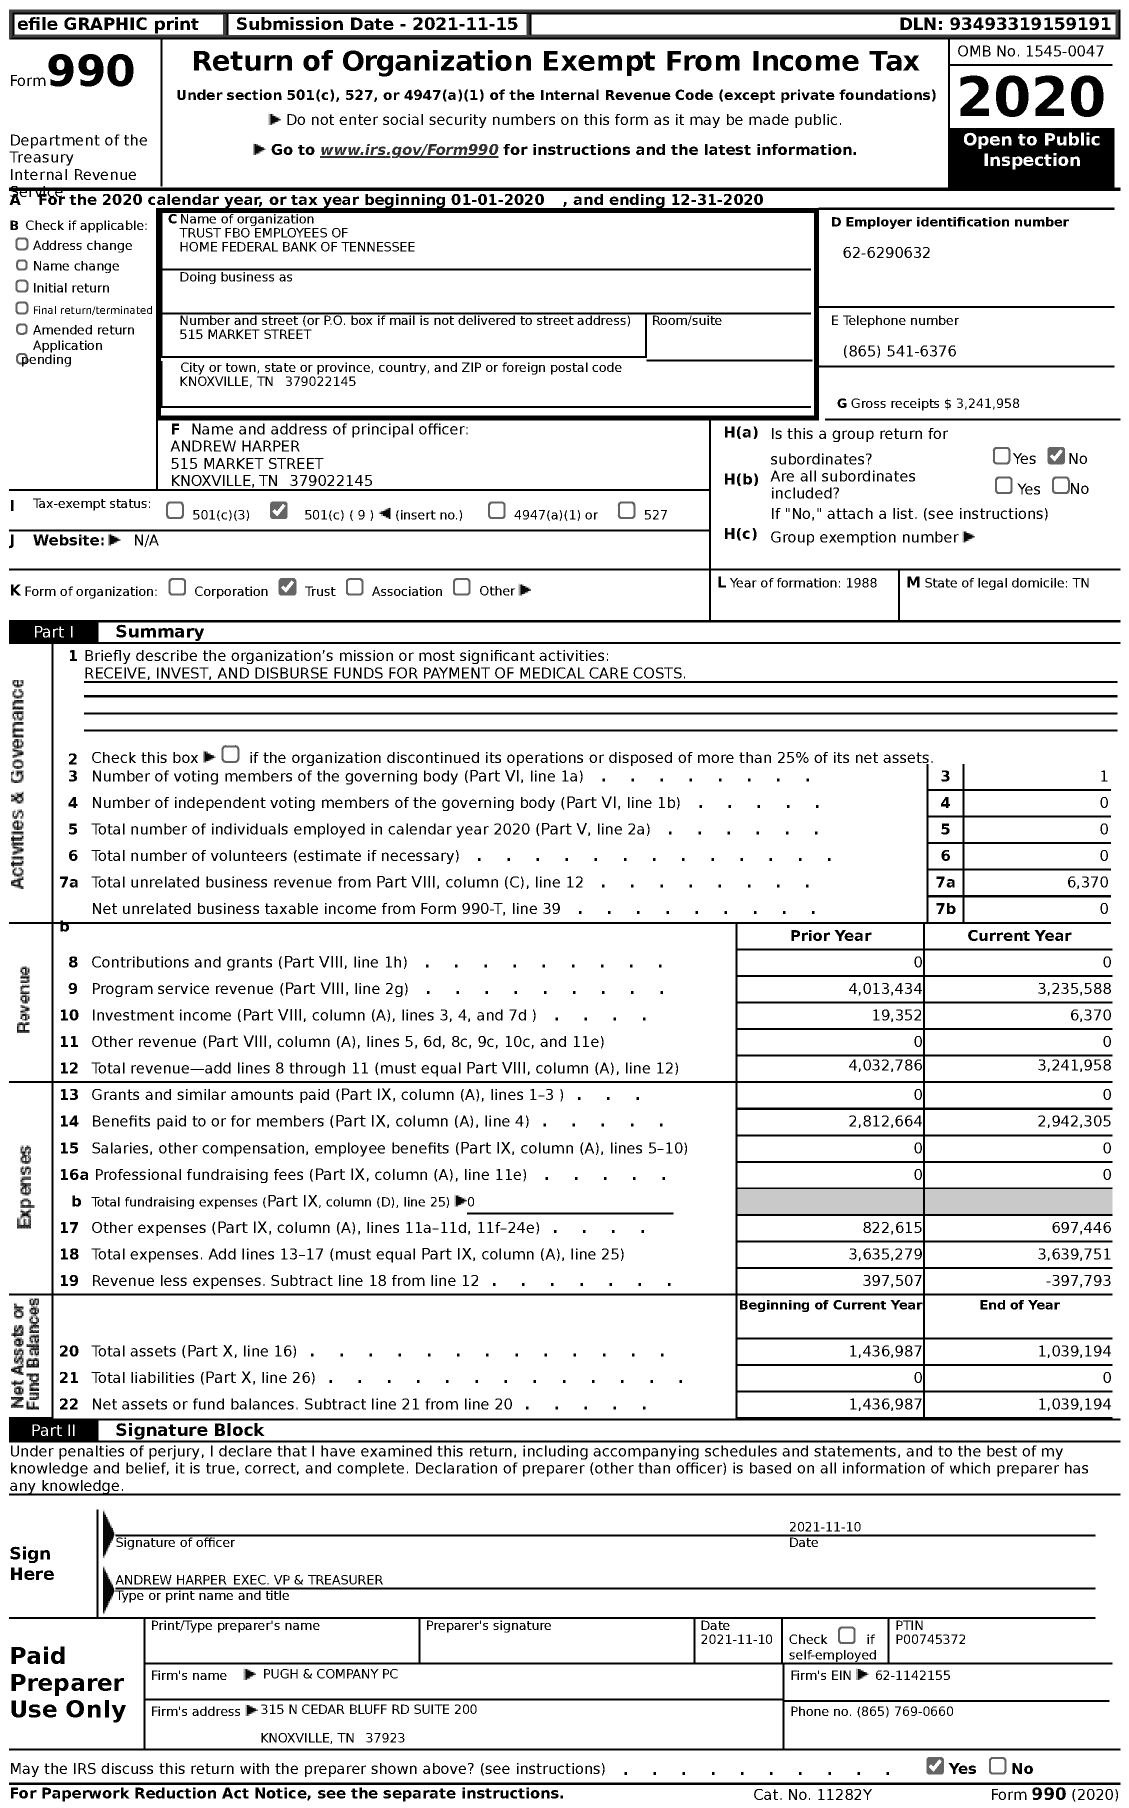 Image of first page of 2020 Form 990 for Trust Fbo Employees of Home Federal Bank of Tennessee